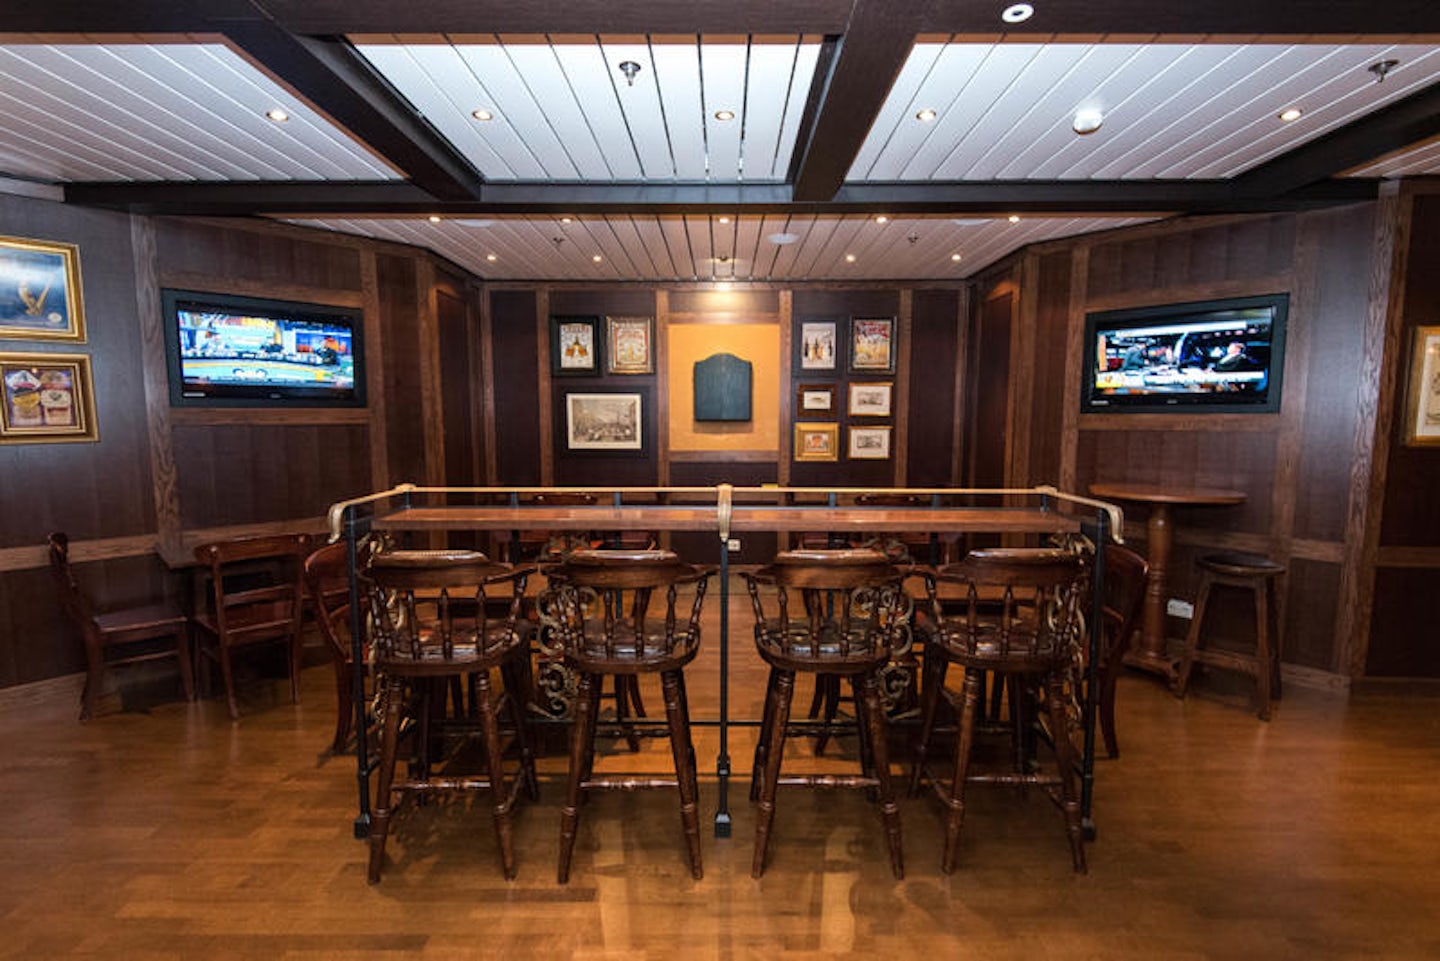 King & Country Pub on Brilliance of the Seas